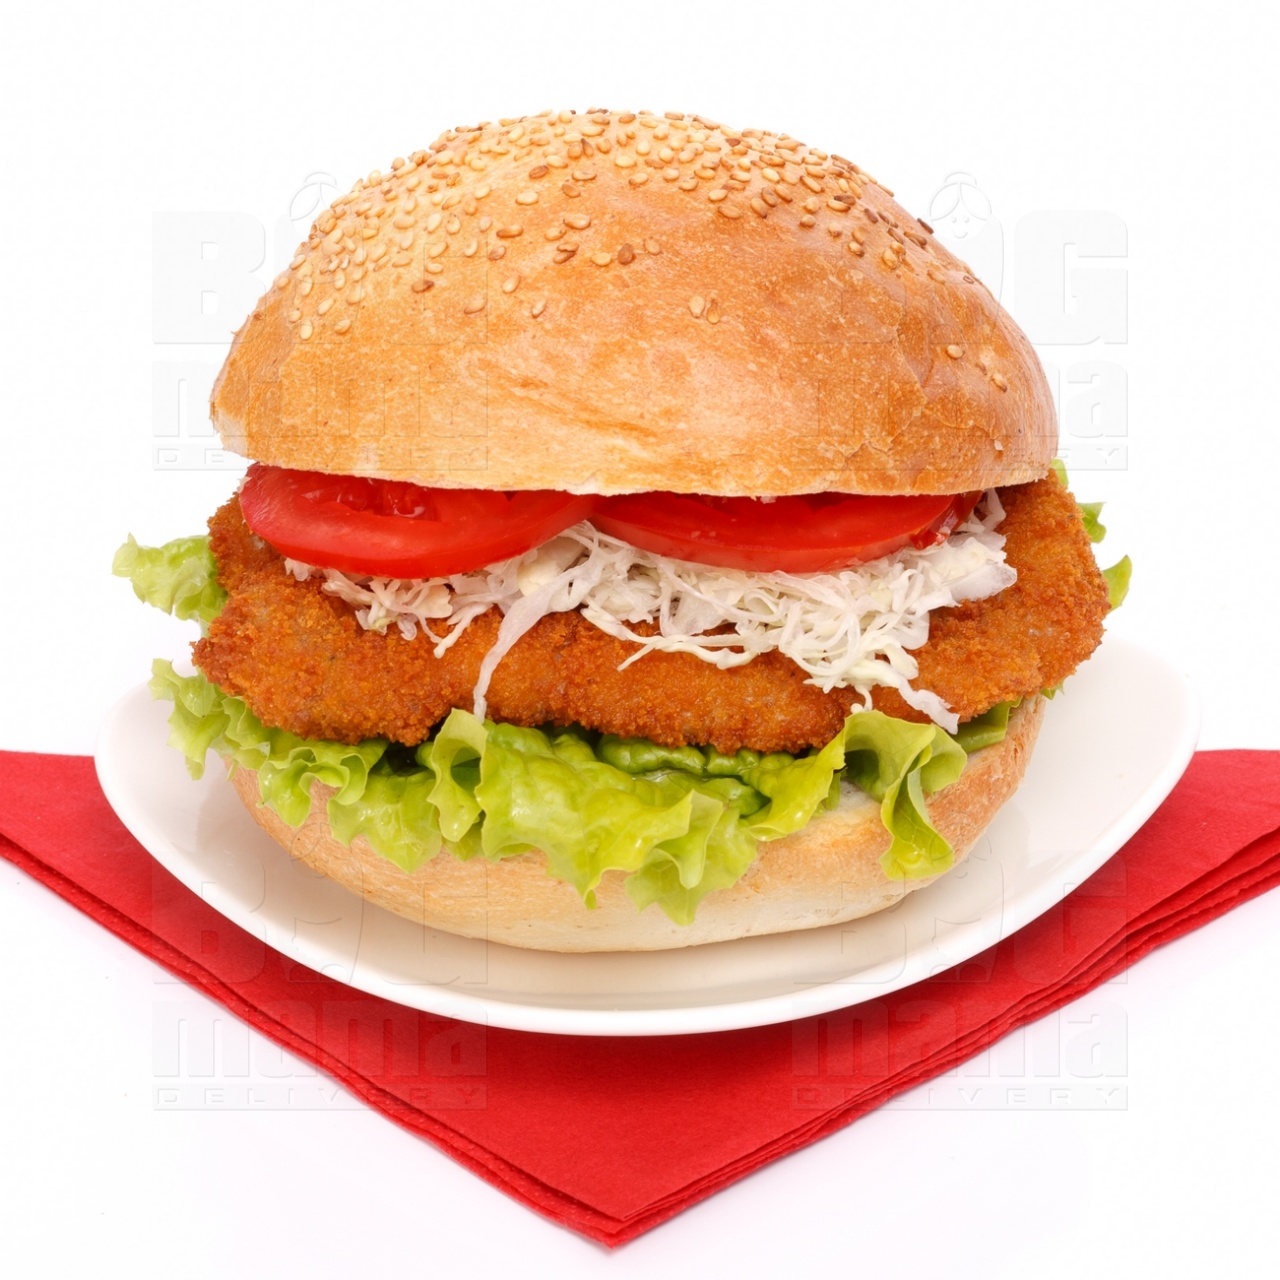 Product #57 image - Sandwich with pork schnitzel